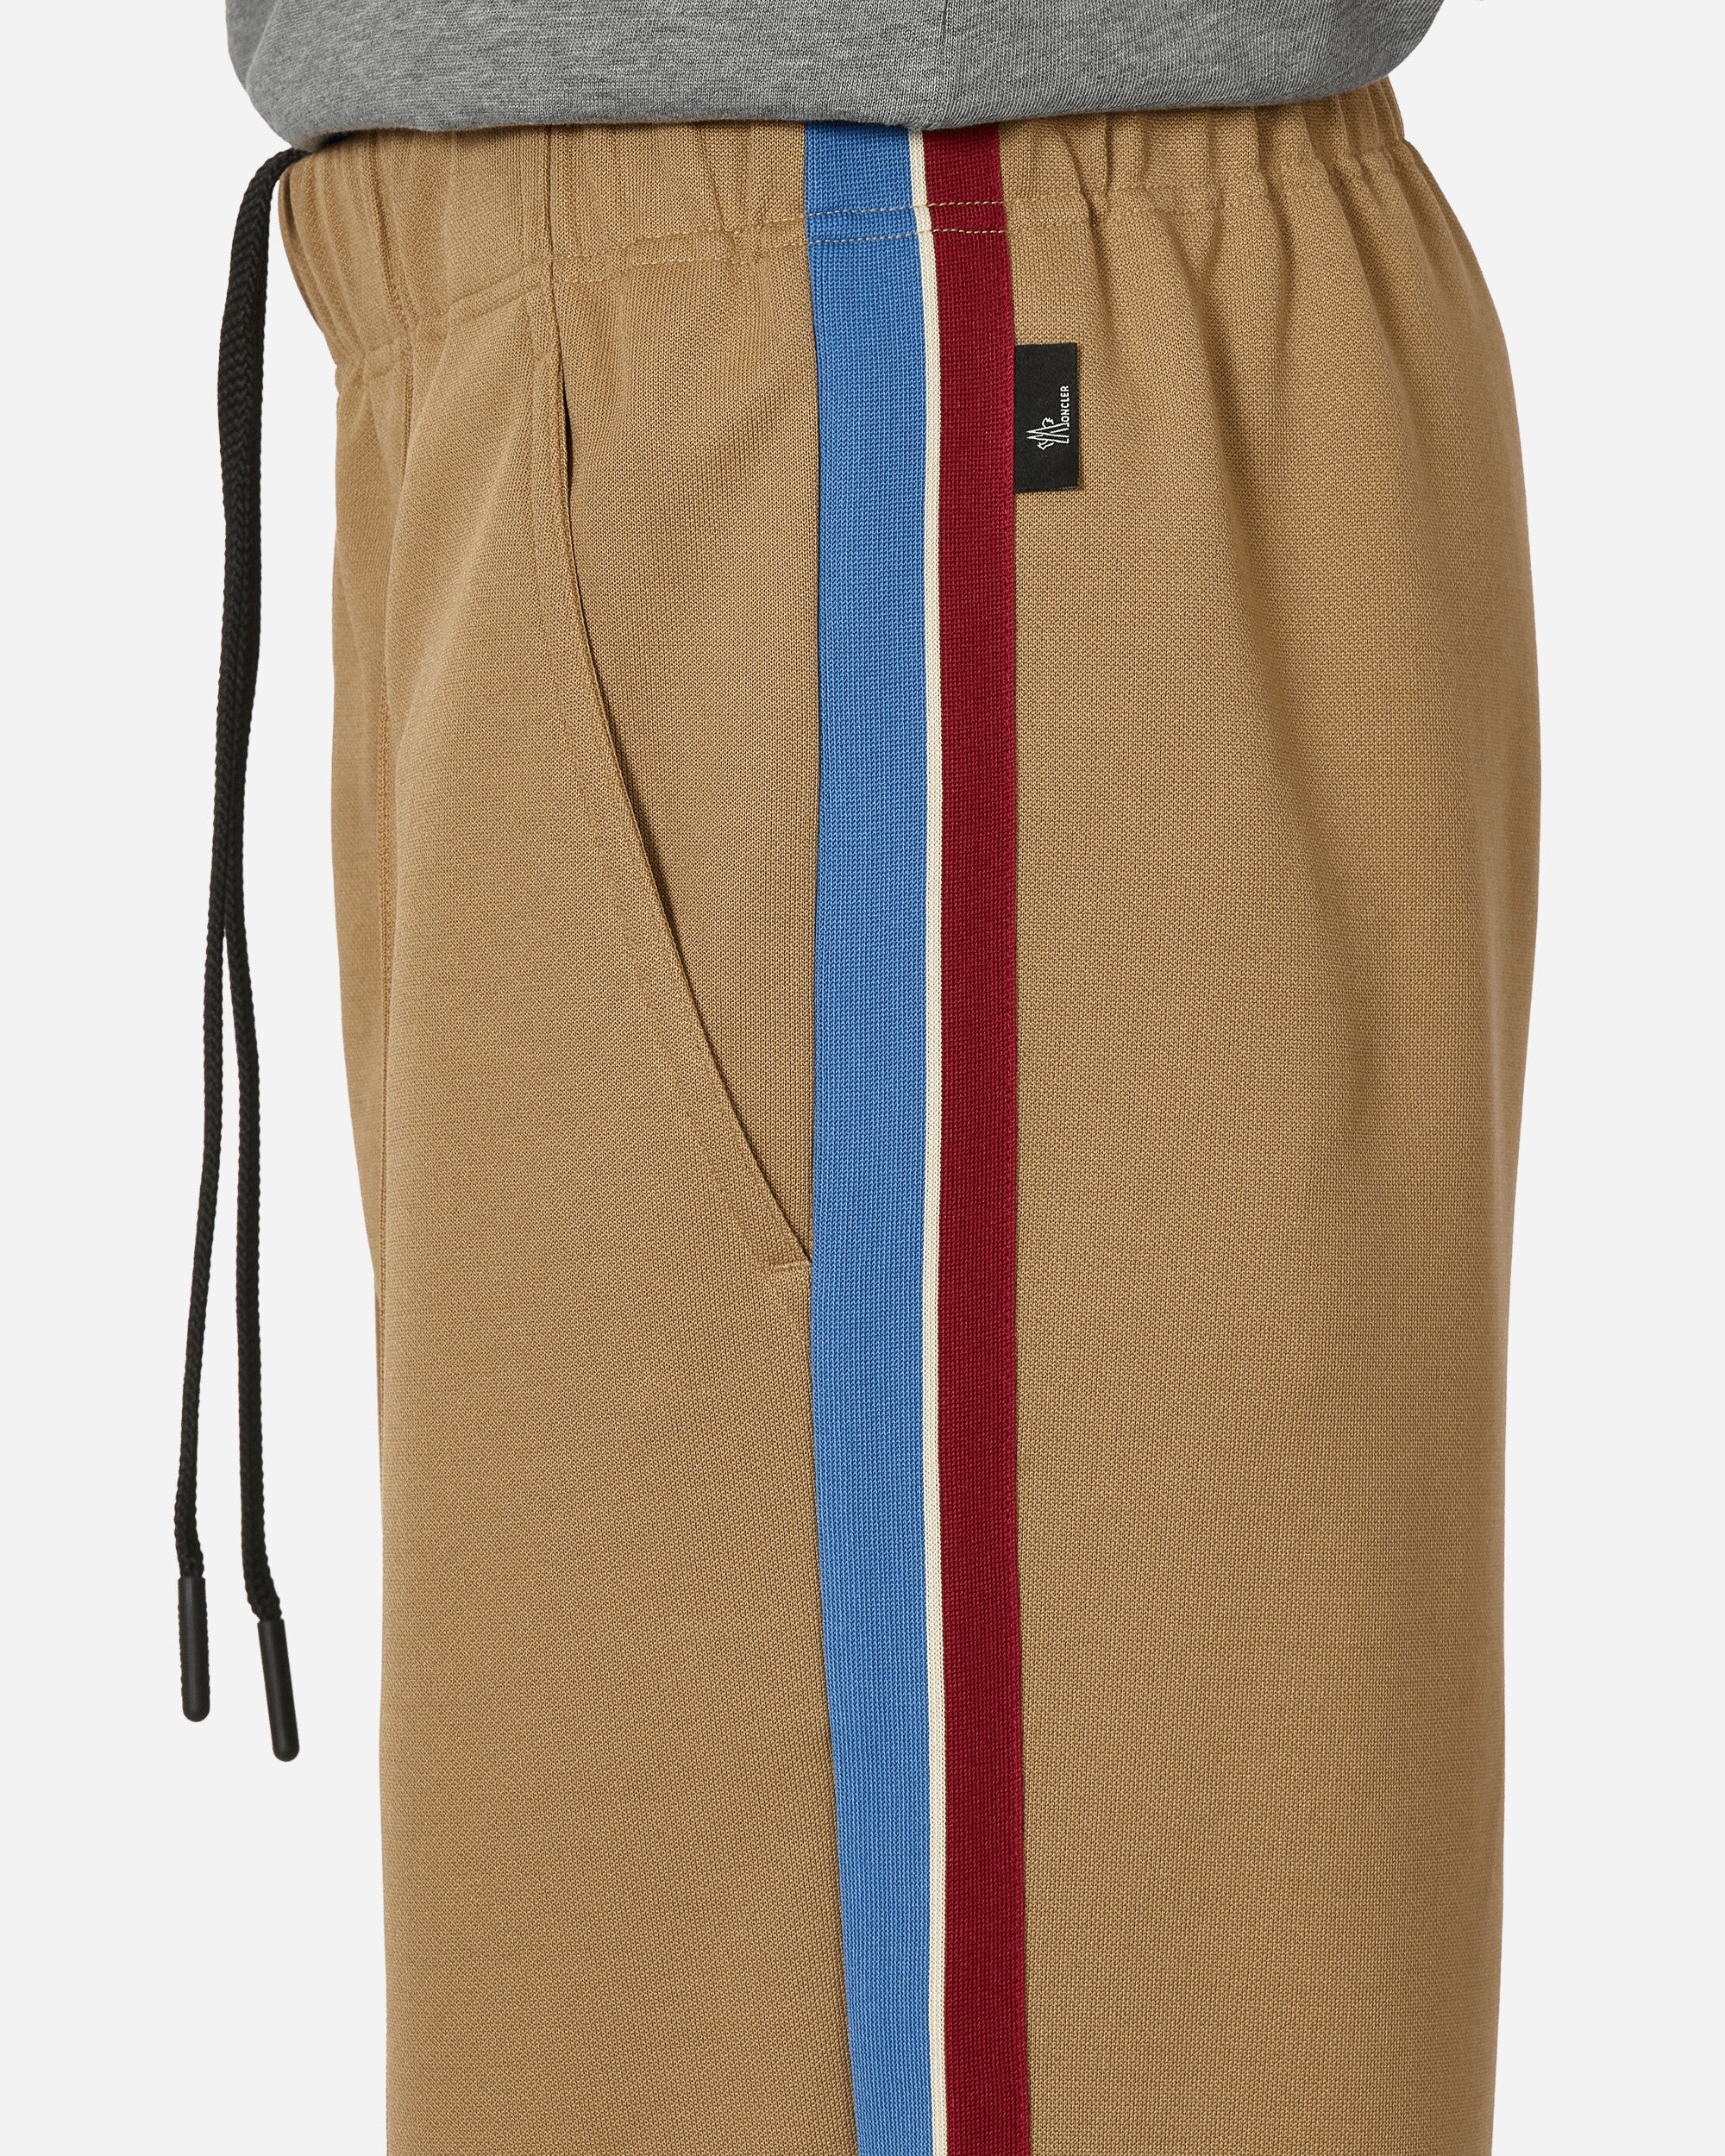 Moncler Grenoble Trousers Beige Pants Trousers 8H00006829B5 248